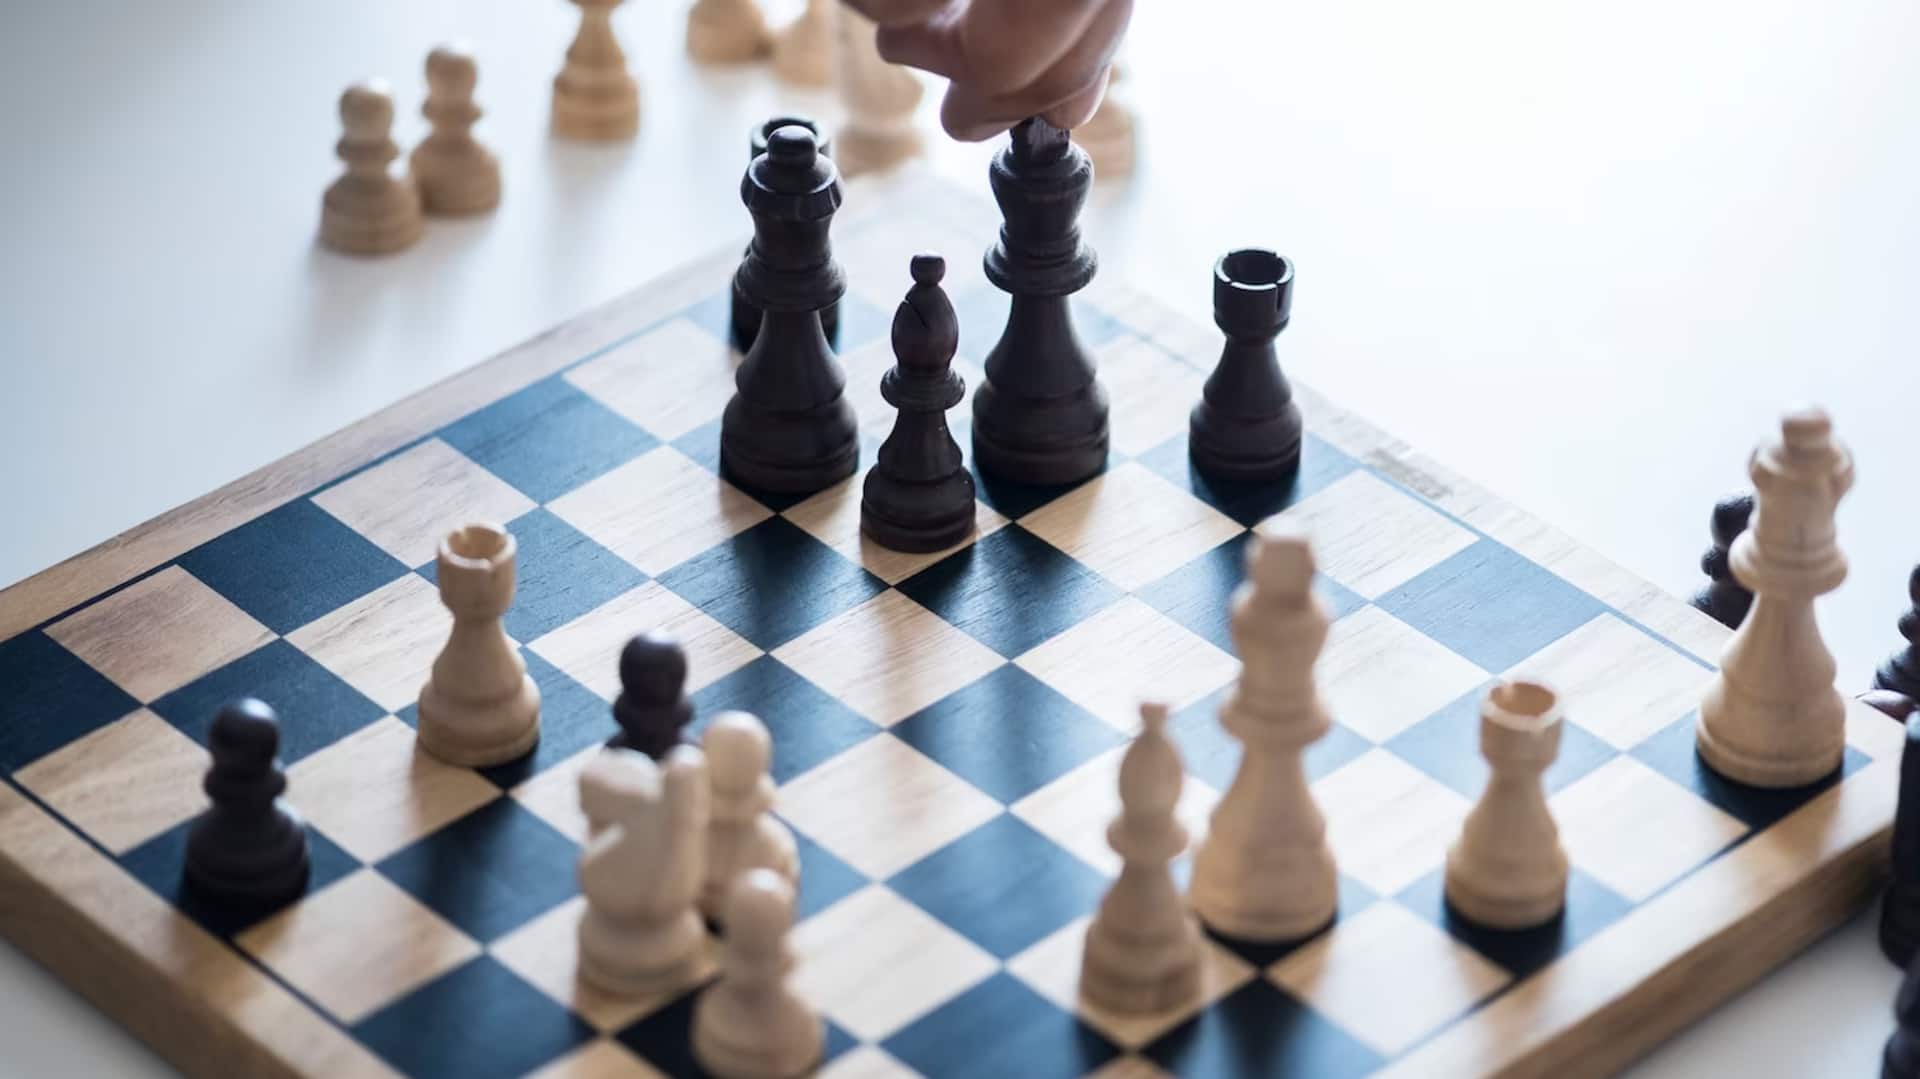 International Chess Day: How it transforms mind, body, and spirit